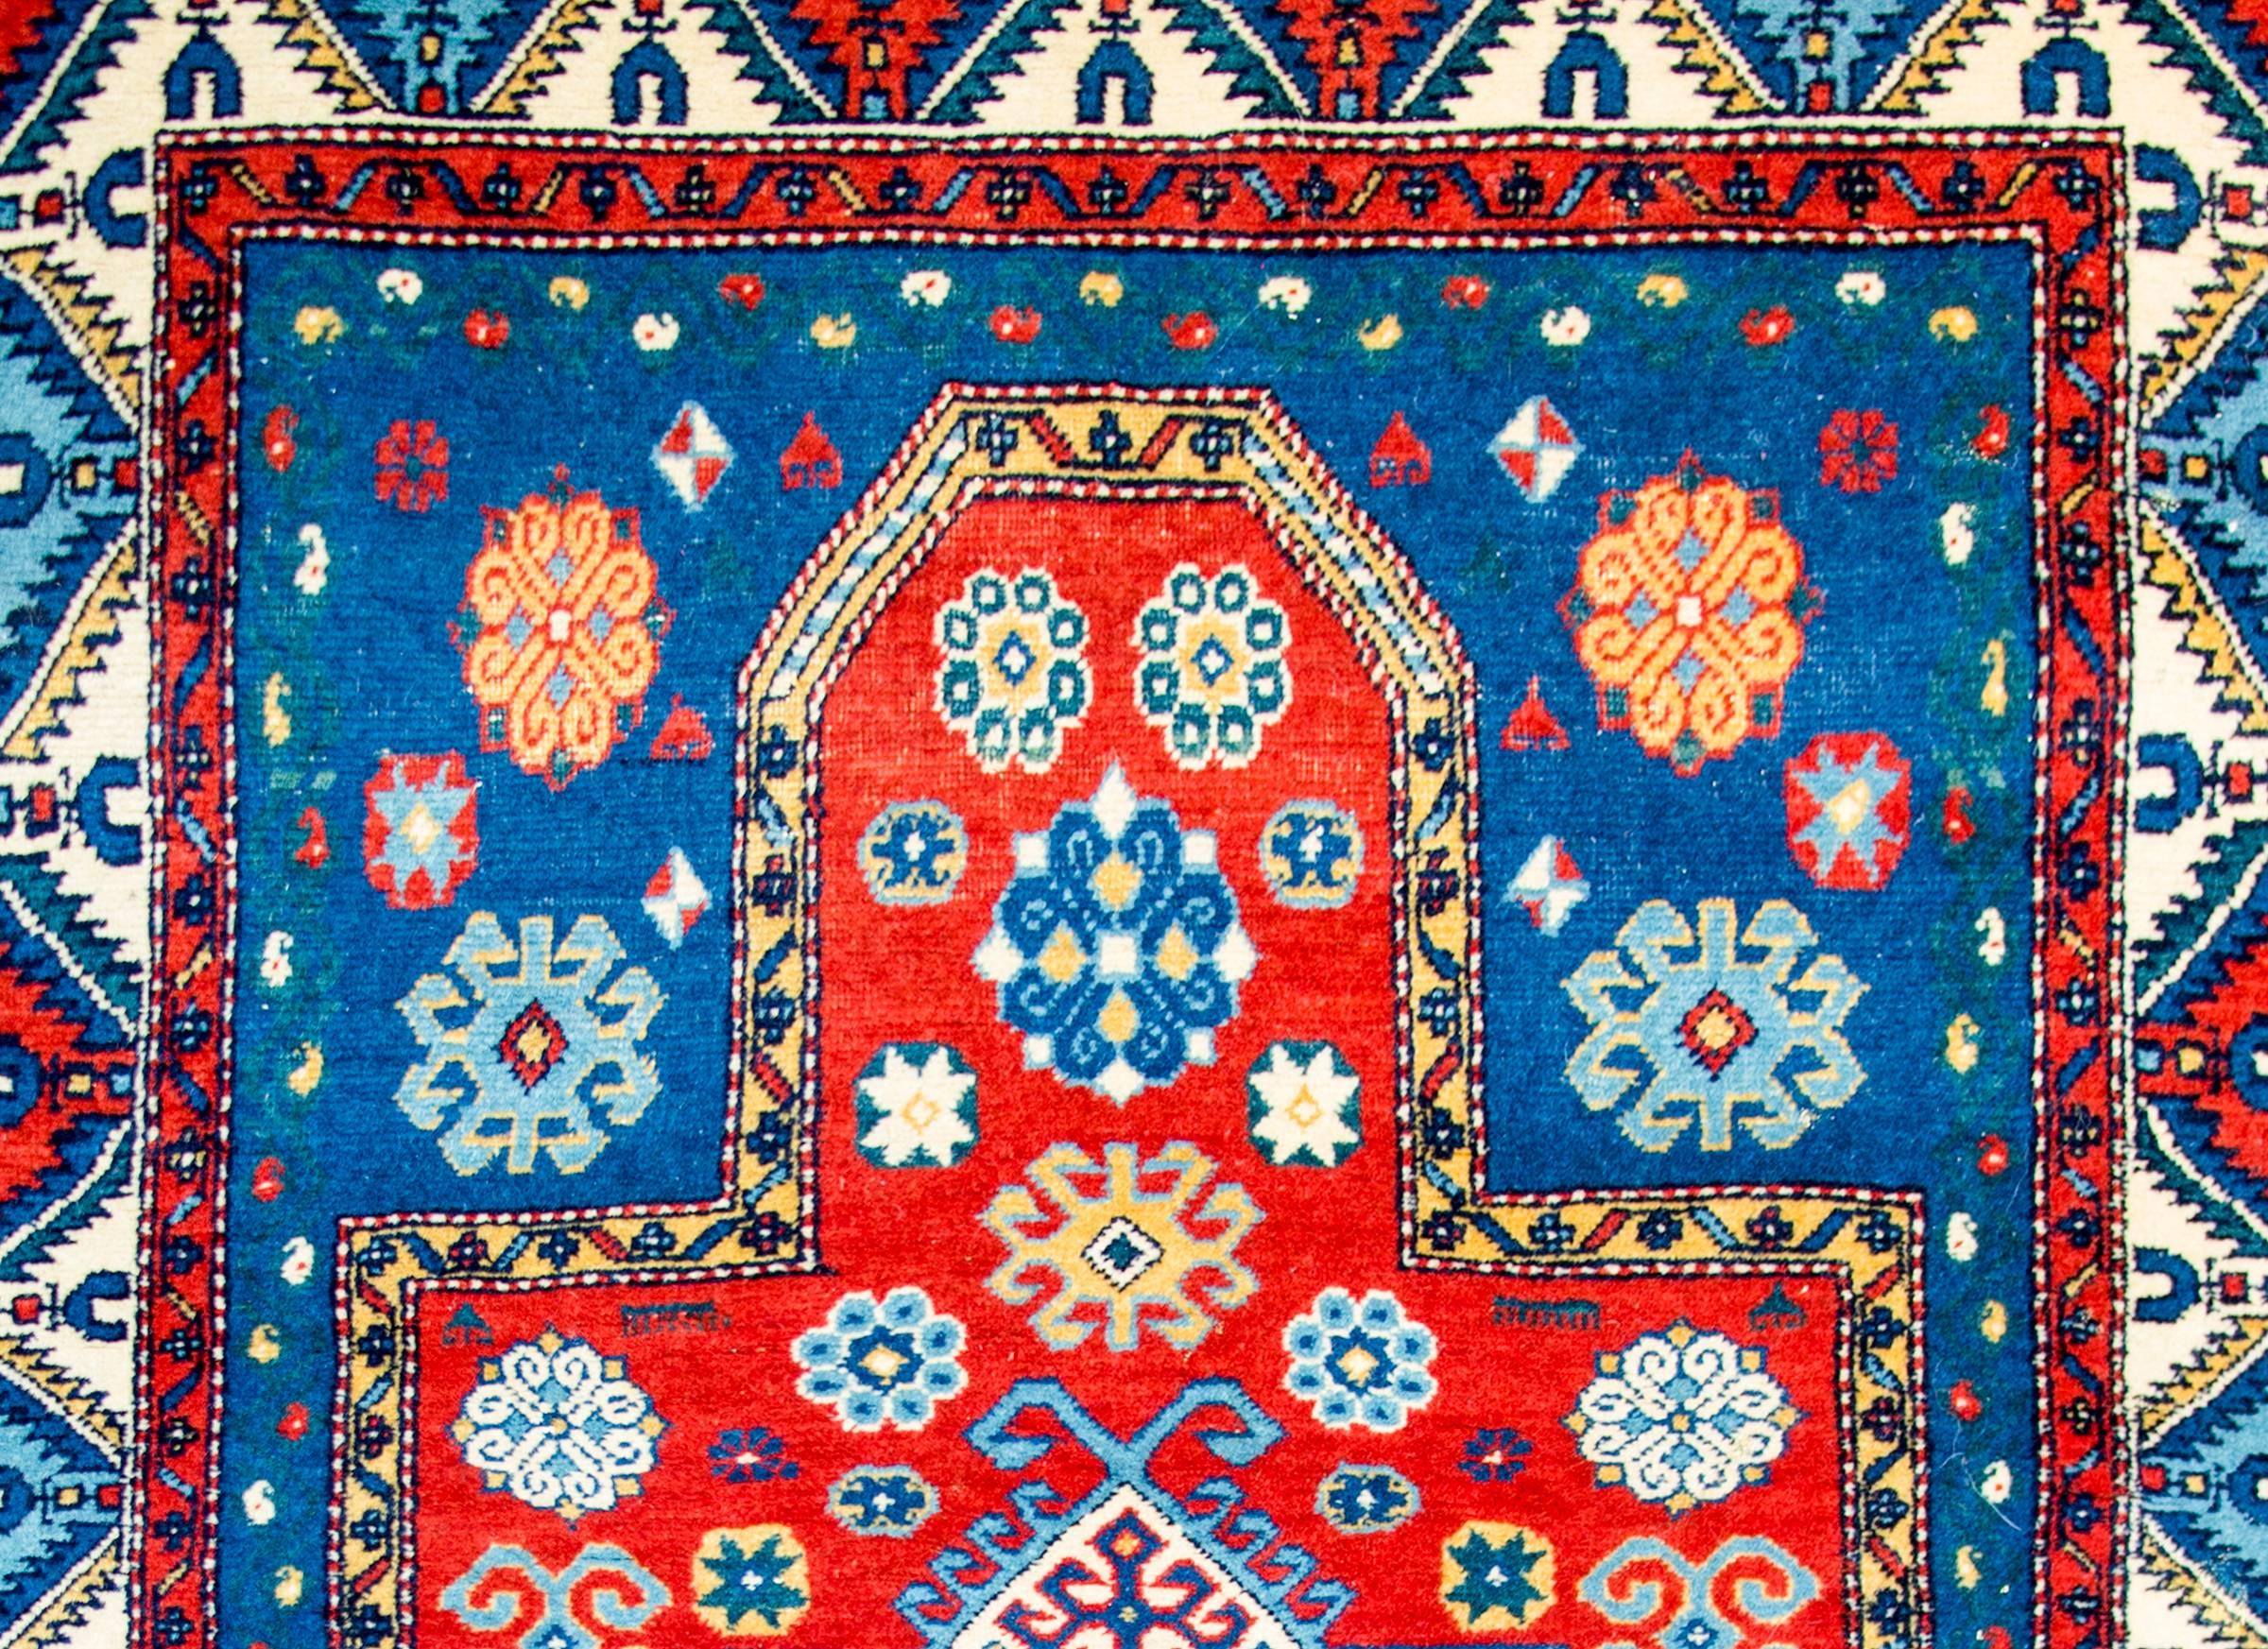 An early 20th century Kazak prayer rug with an all-over stylized floral pattern woven with light and dark indigo, and gold colored wool on a brilliant crimson colored background. The border is complex with multiple stylized petite floral patterned